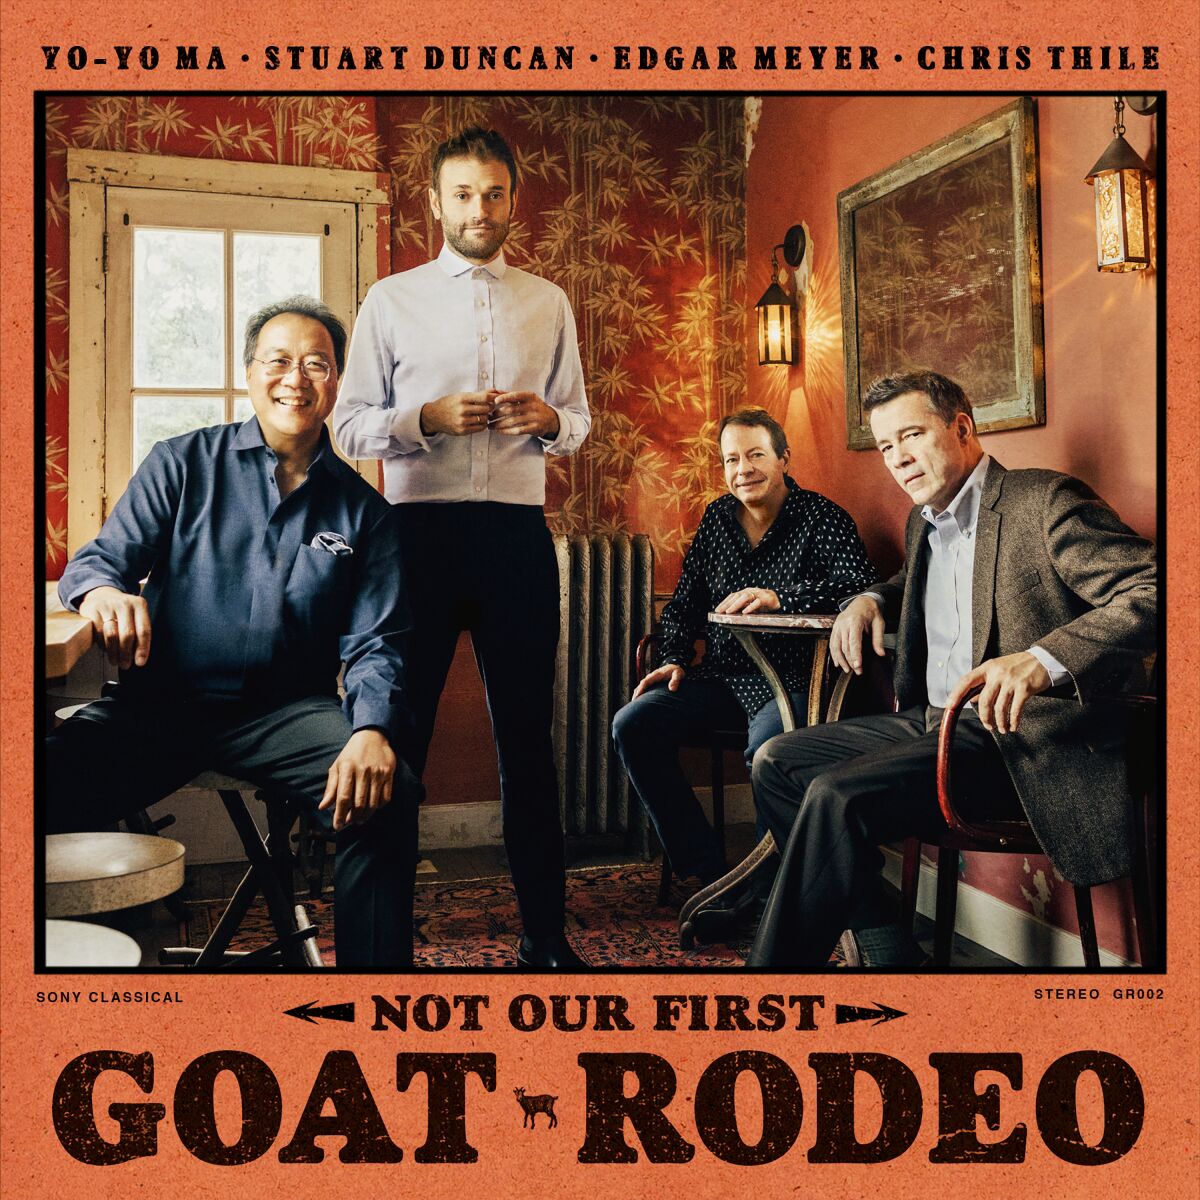 "Not Our First Goat Rodeo" is, fittingly, the second album by Goat Rodeo